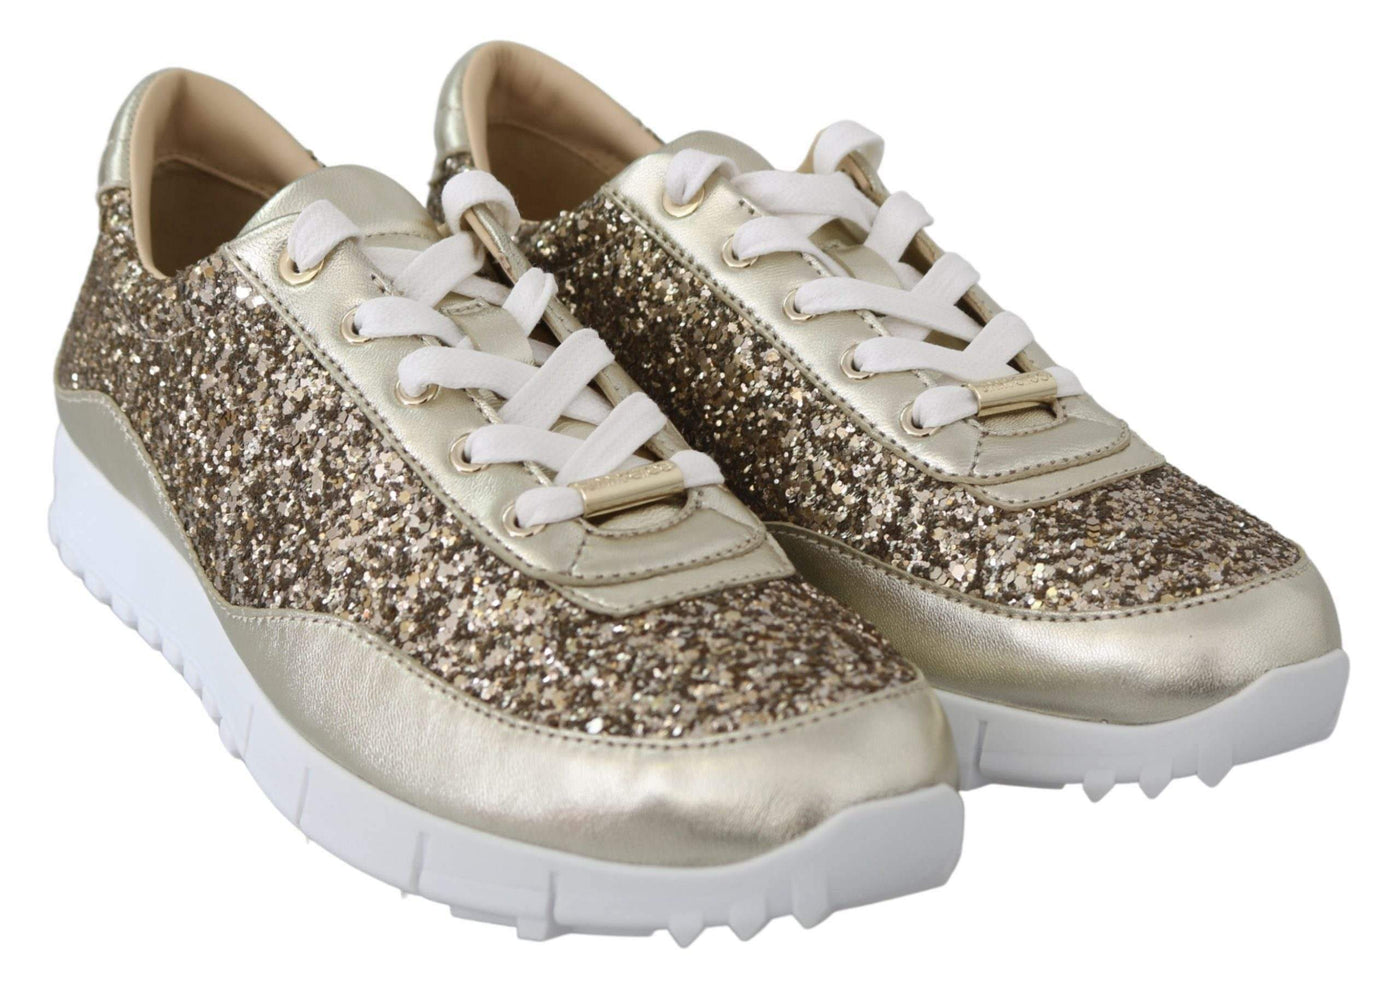 Monza Antique Gold Leather Sneakers #women, EU34.5/US4.5, EU35.5/US5.5, EU35/US5, EU38/US8, feed-agegroup-adult, feed-color-gold, feed-gender-female, feed-size-US4.5, feed-size-US5, feed-size-US5.5, Gender_Women, Gold, Jimmy Choo, Shoes - New Arrivals, Sneakers - Women - Shoes at SEYMAYKA